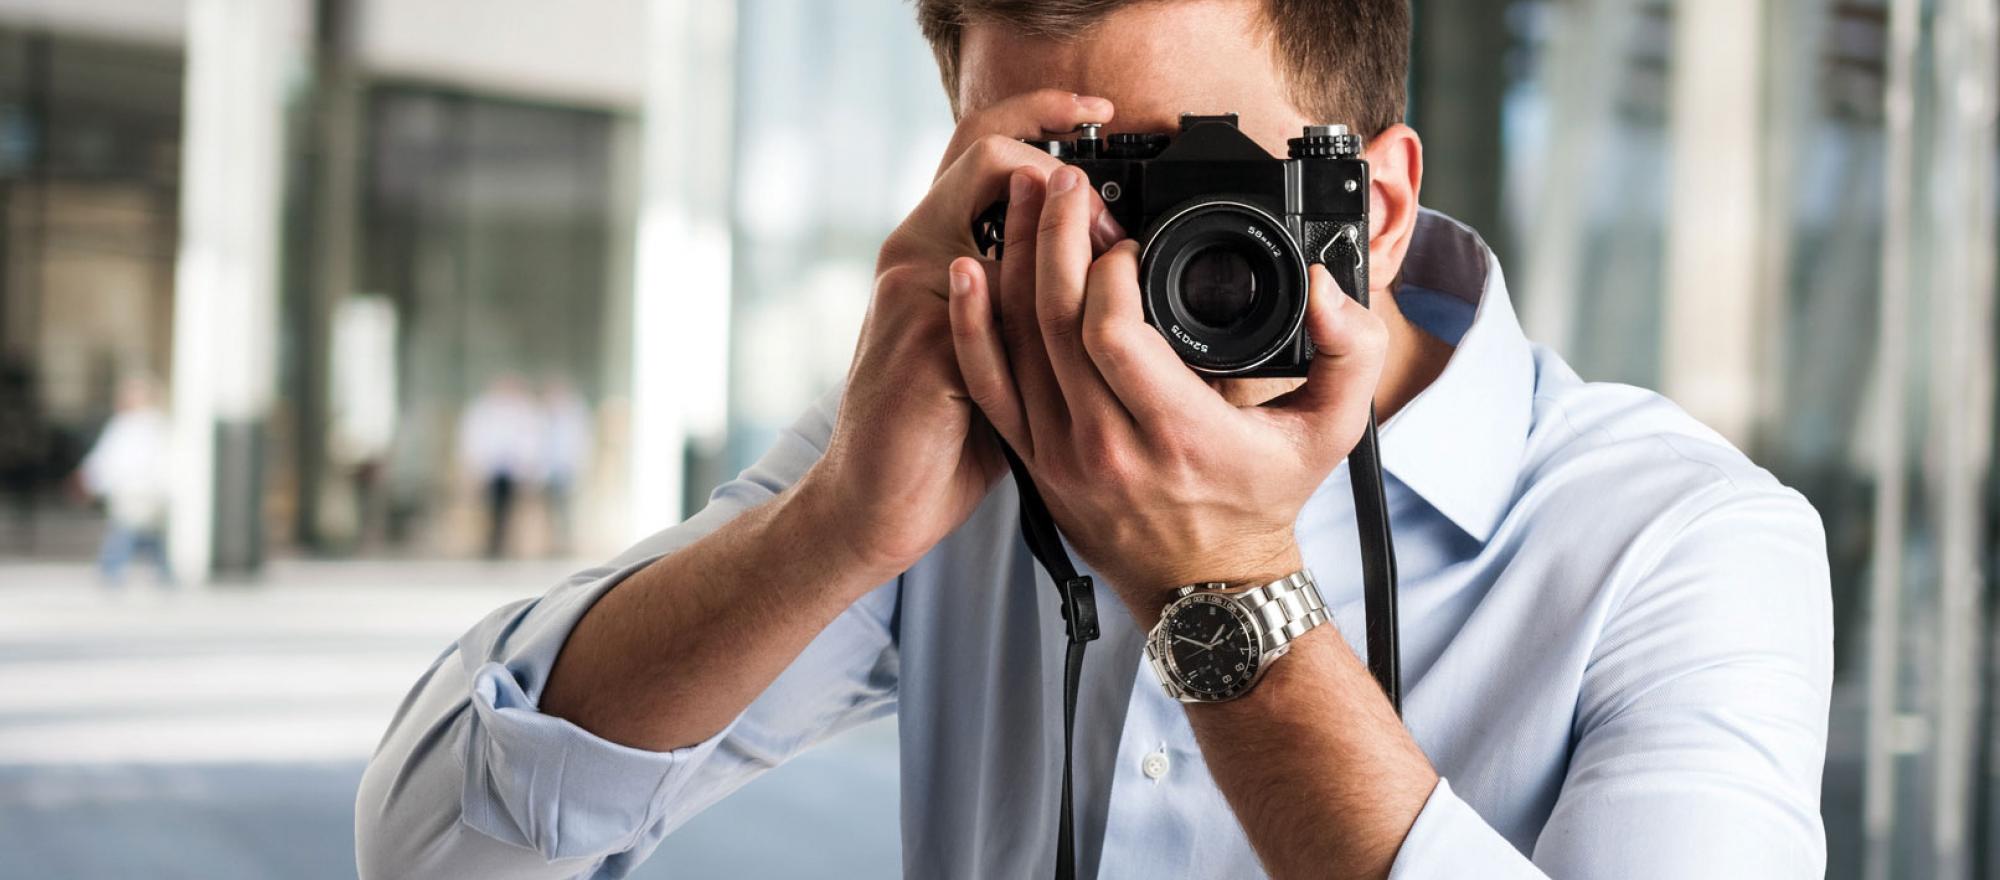 Six new cameras offer a wide range of options for casual photographers and serious photography buffs. (Photo: Fotolia)